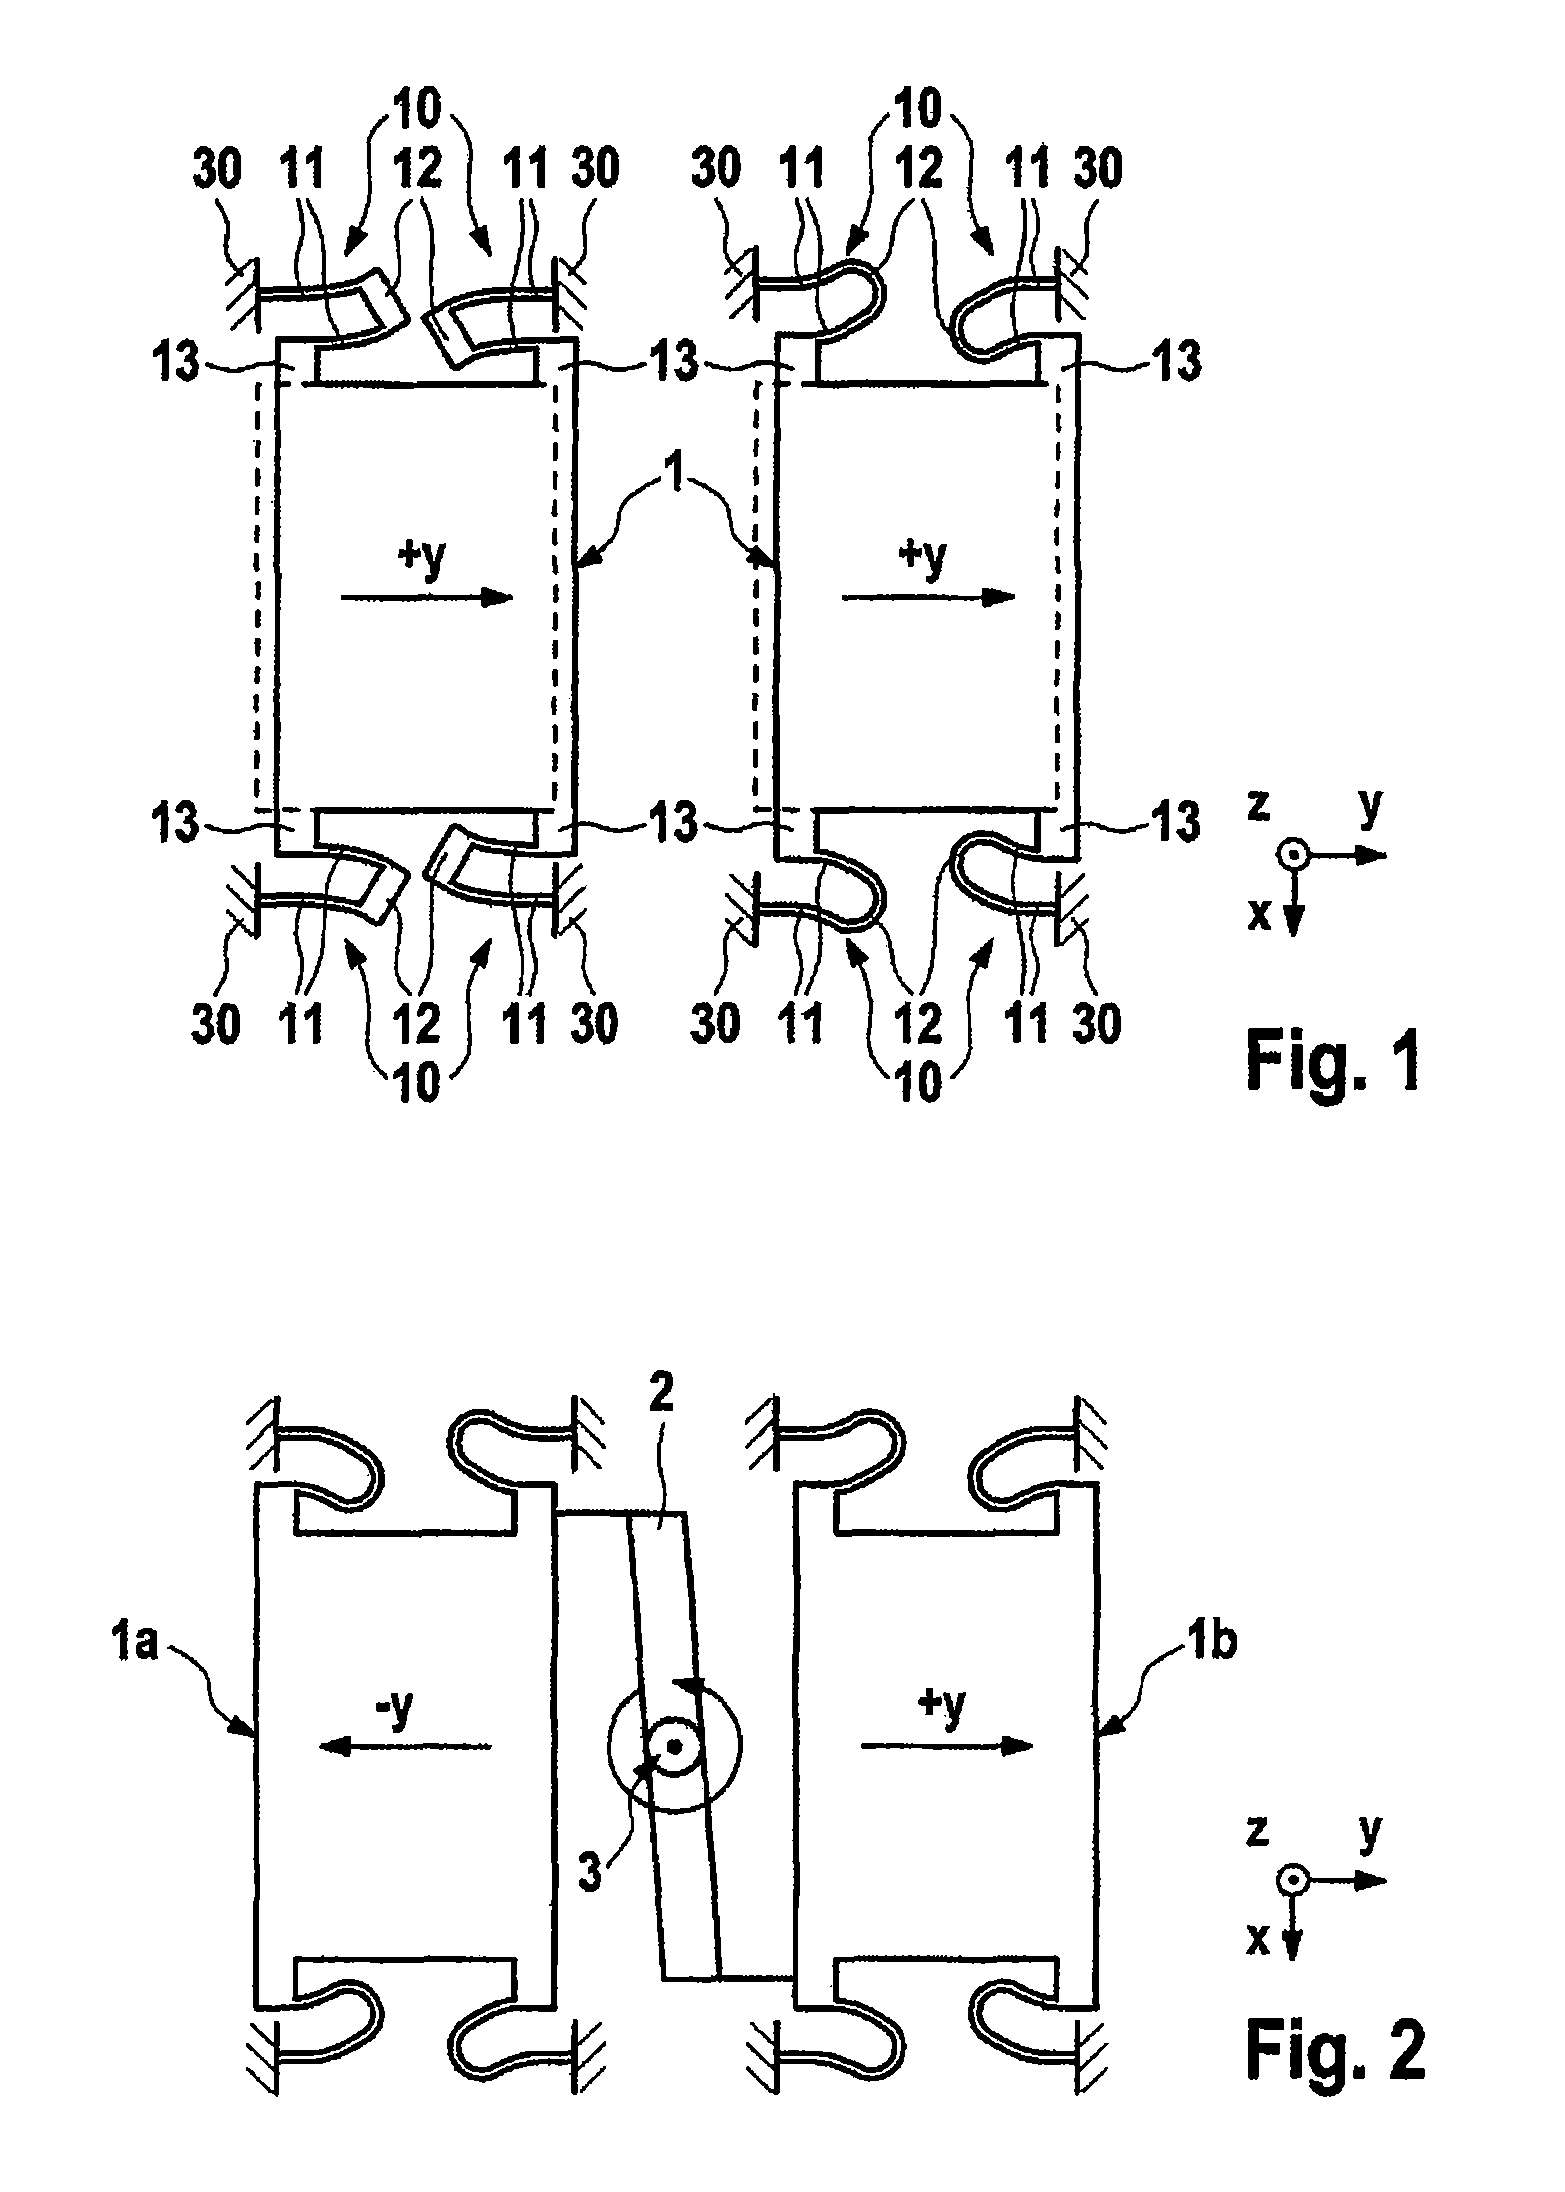 Micromechanical rotation rate sensor with a coupling bar and suspension spring elements for quadrature suppression